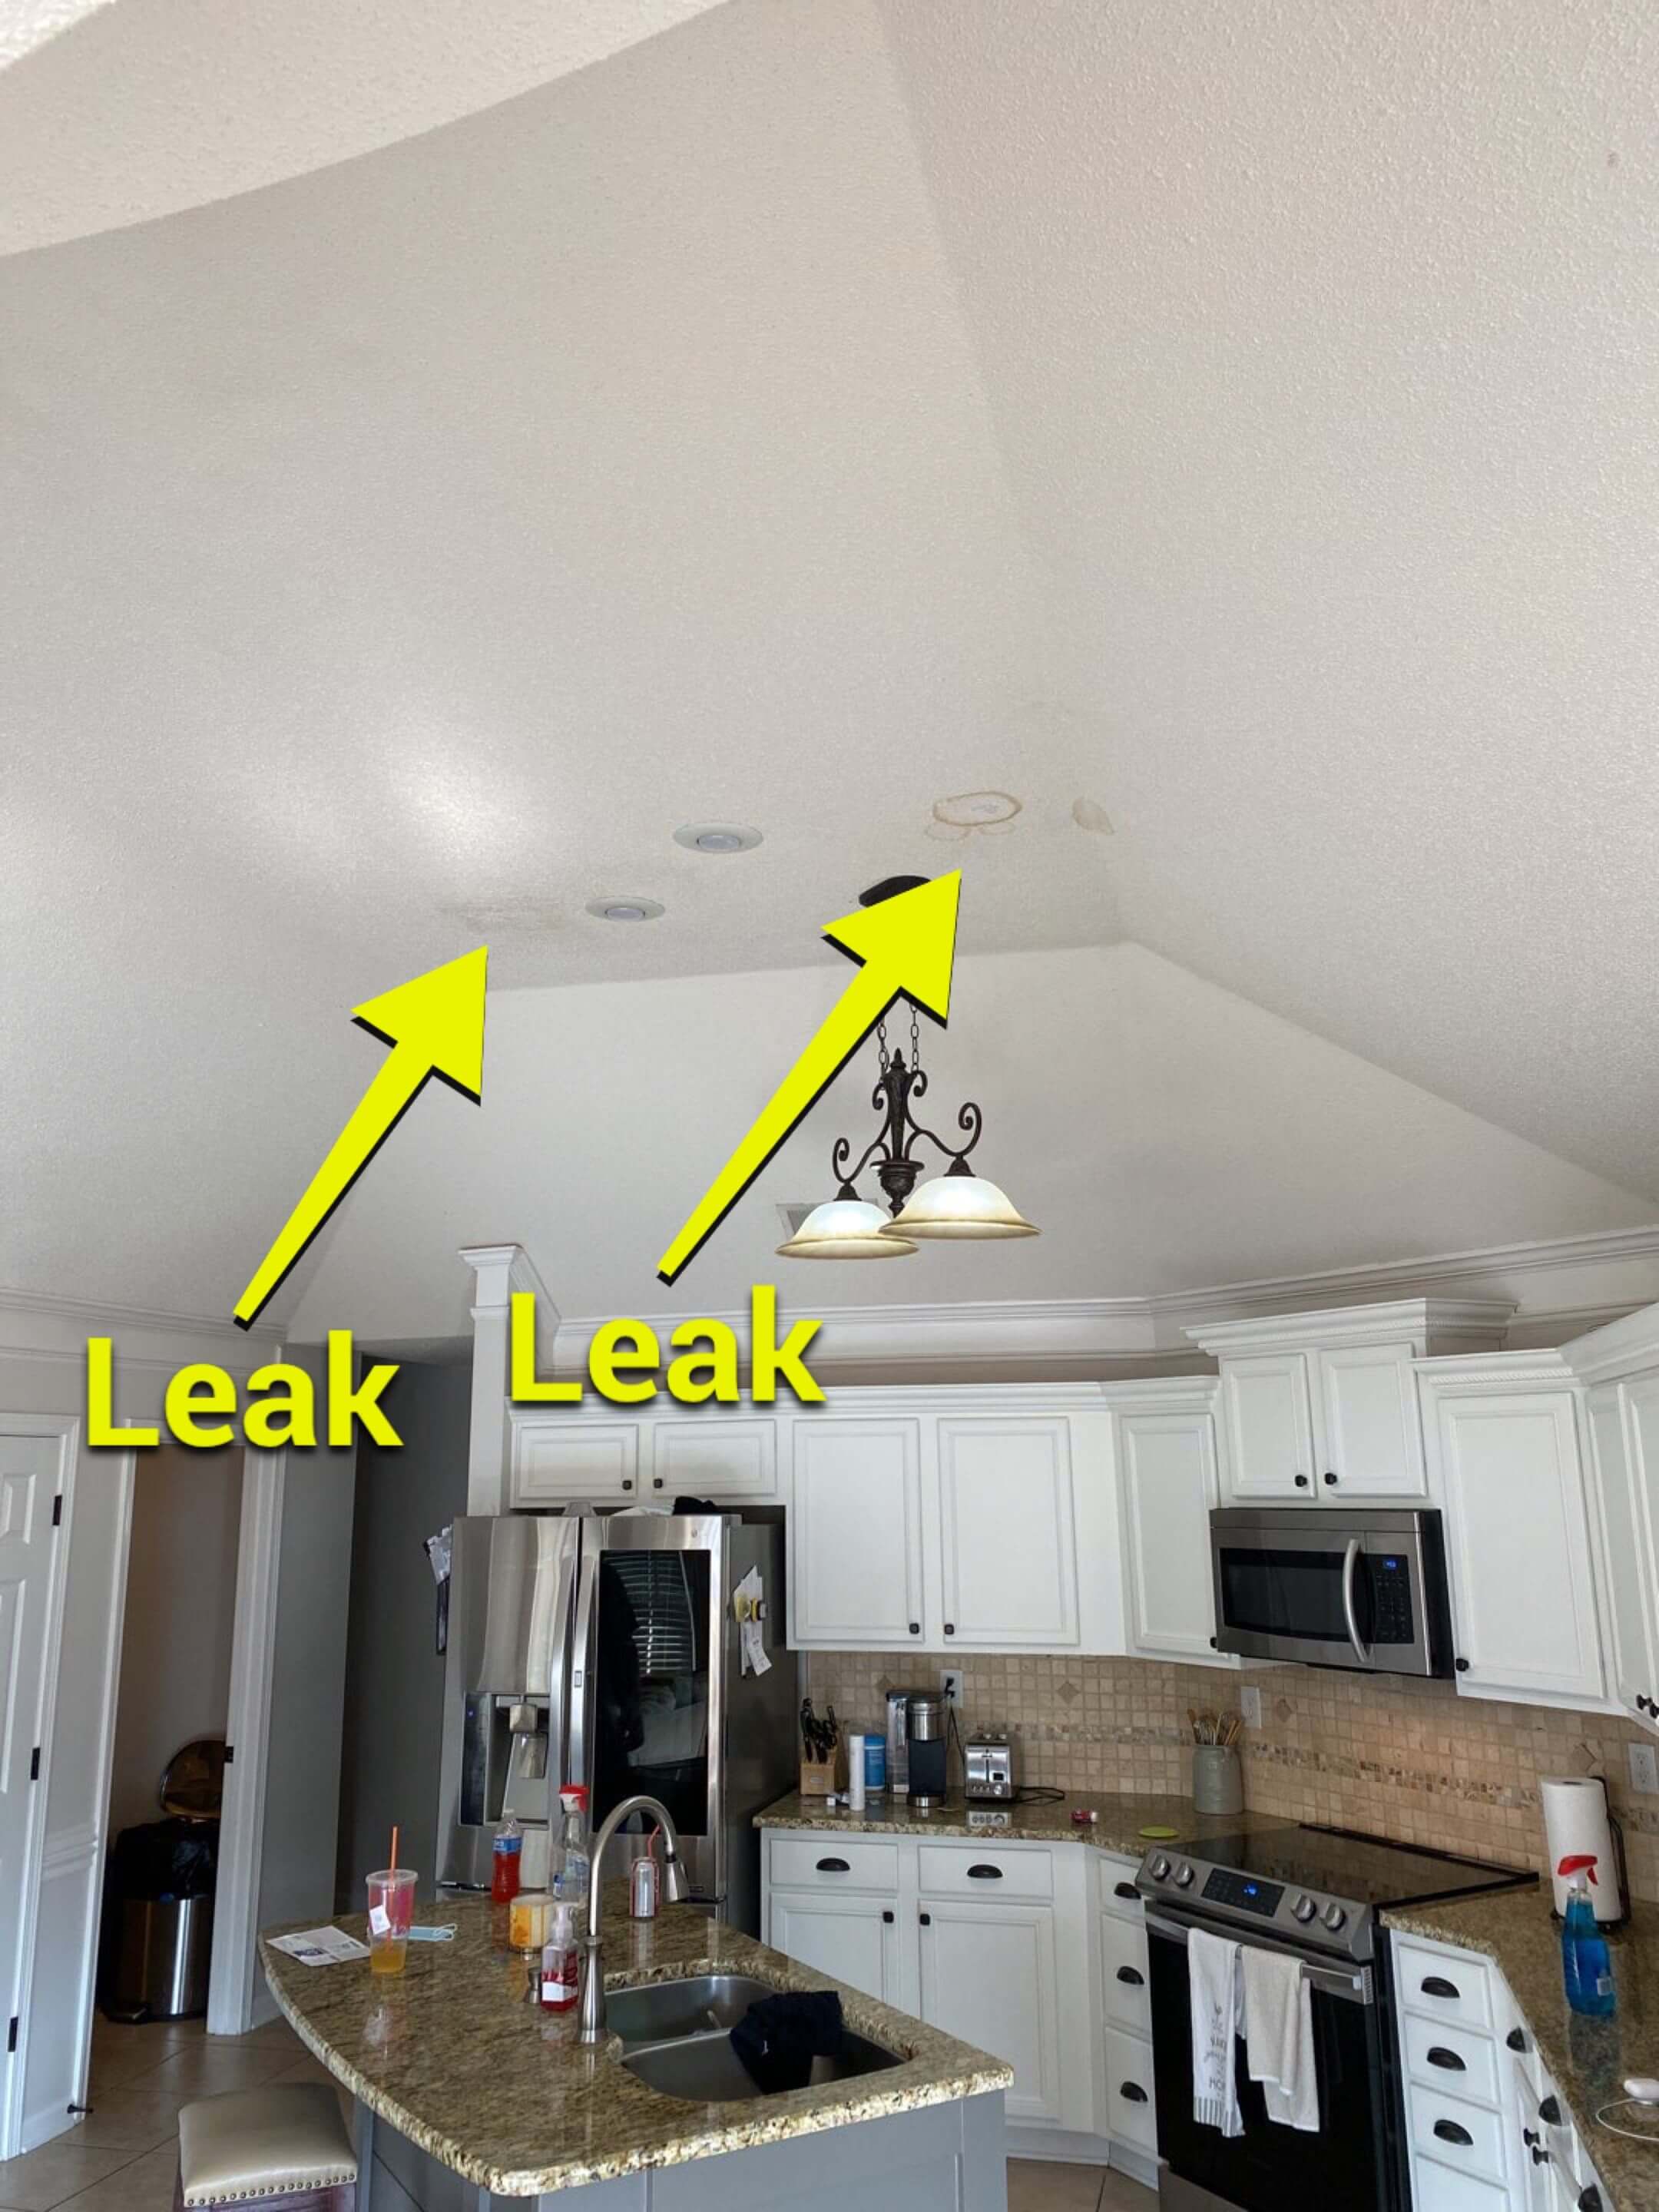 Does Homeowner Insurance Cover Roof Leaks?